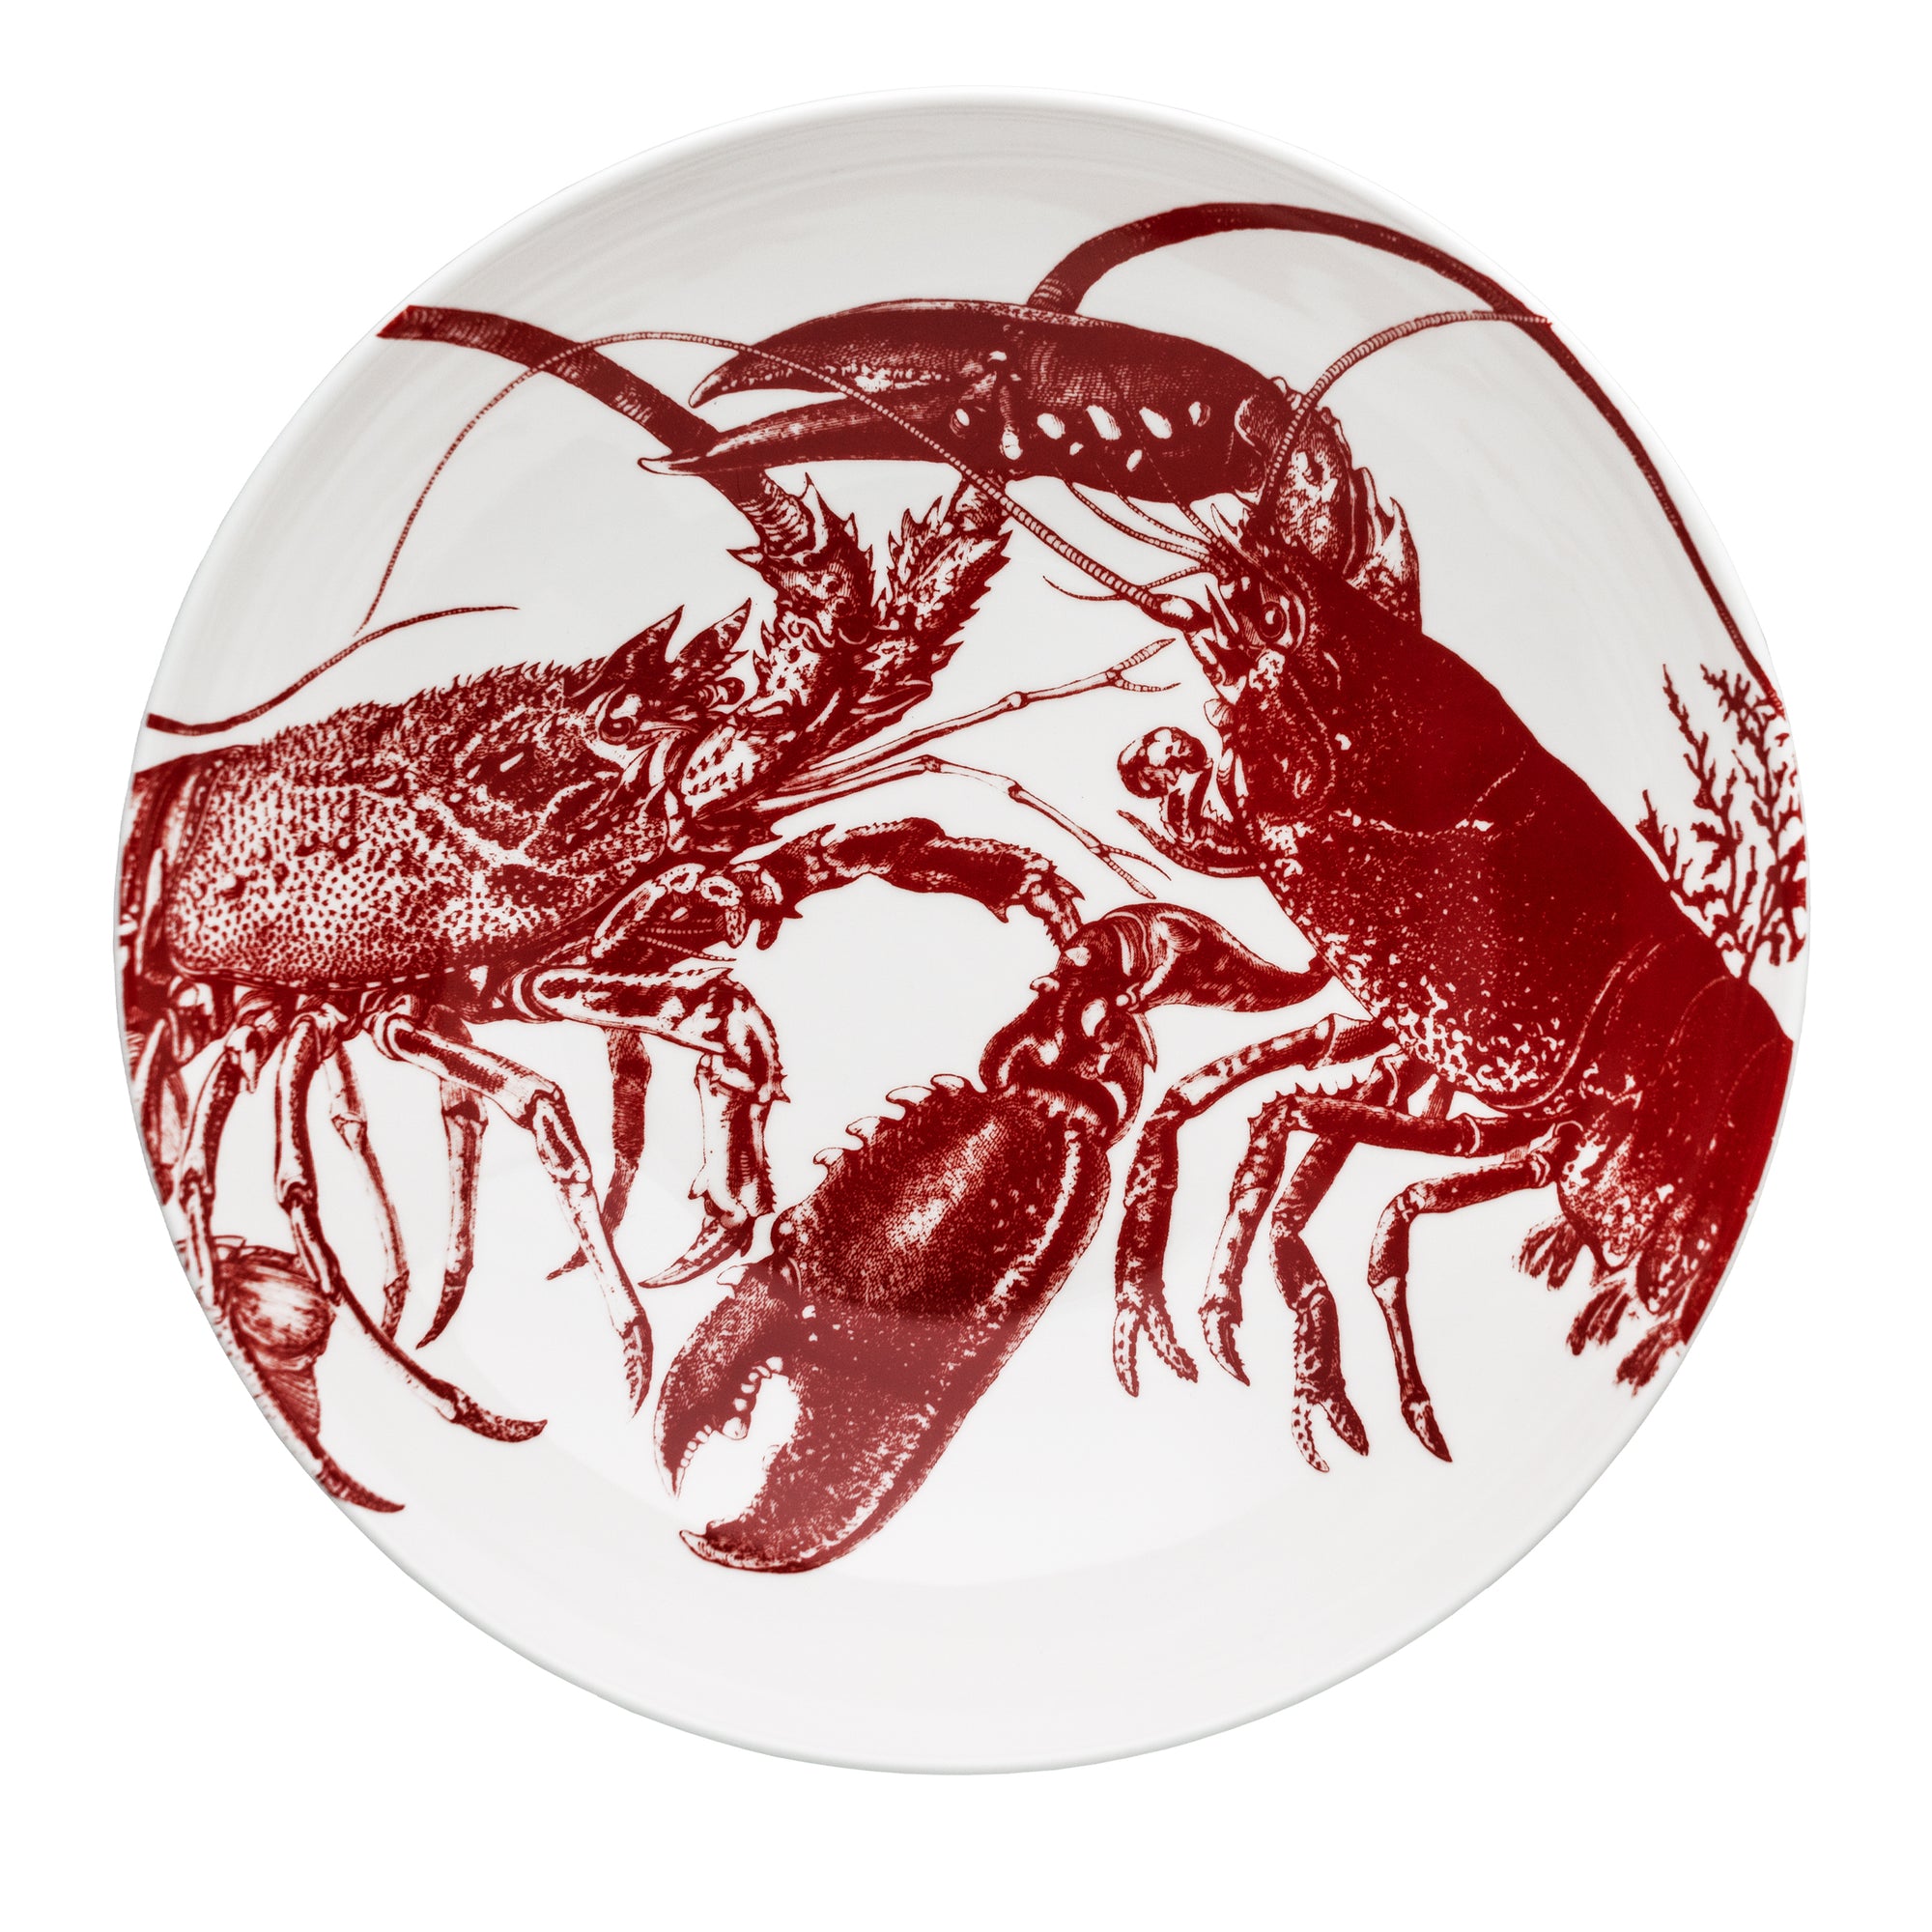 A white ceramic Lobster Wide Serving Bowl by Caskata Artisanal Home featuring a red illustration of two lobsters facing each other, perfect for adding a touch of seaside style tableware to your dining experience.